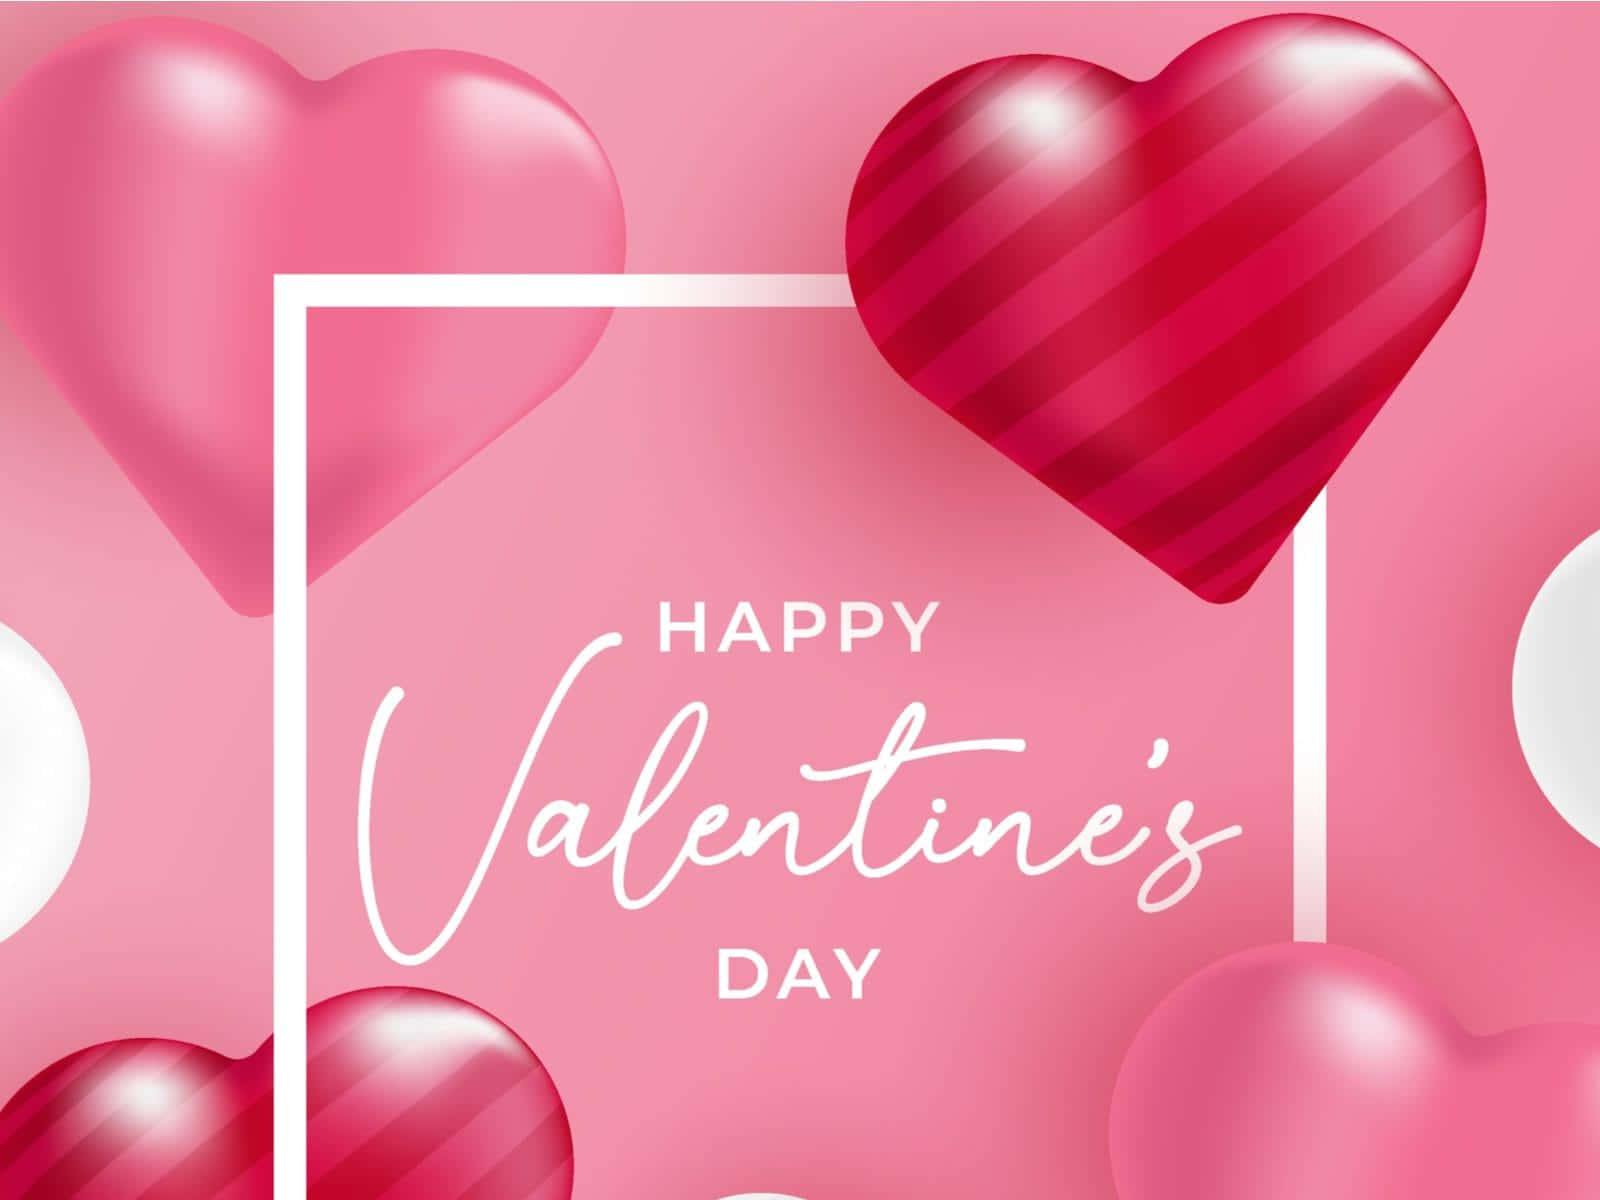 Happy Valentine's Day With Hearts And Balloons